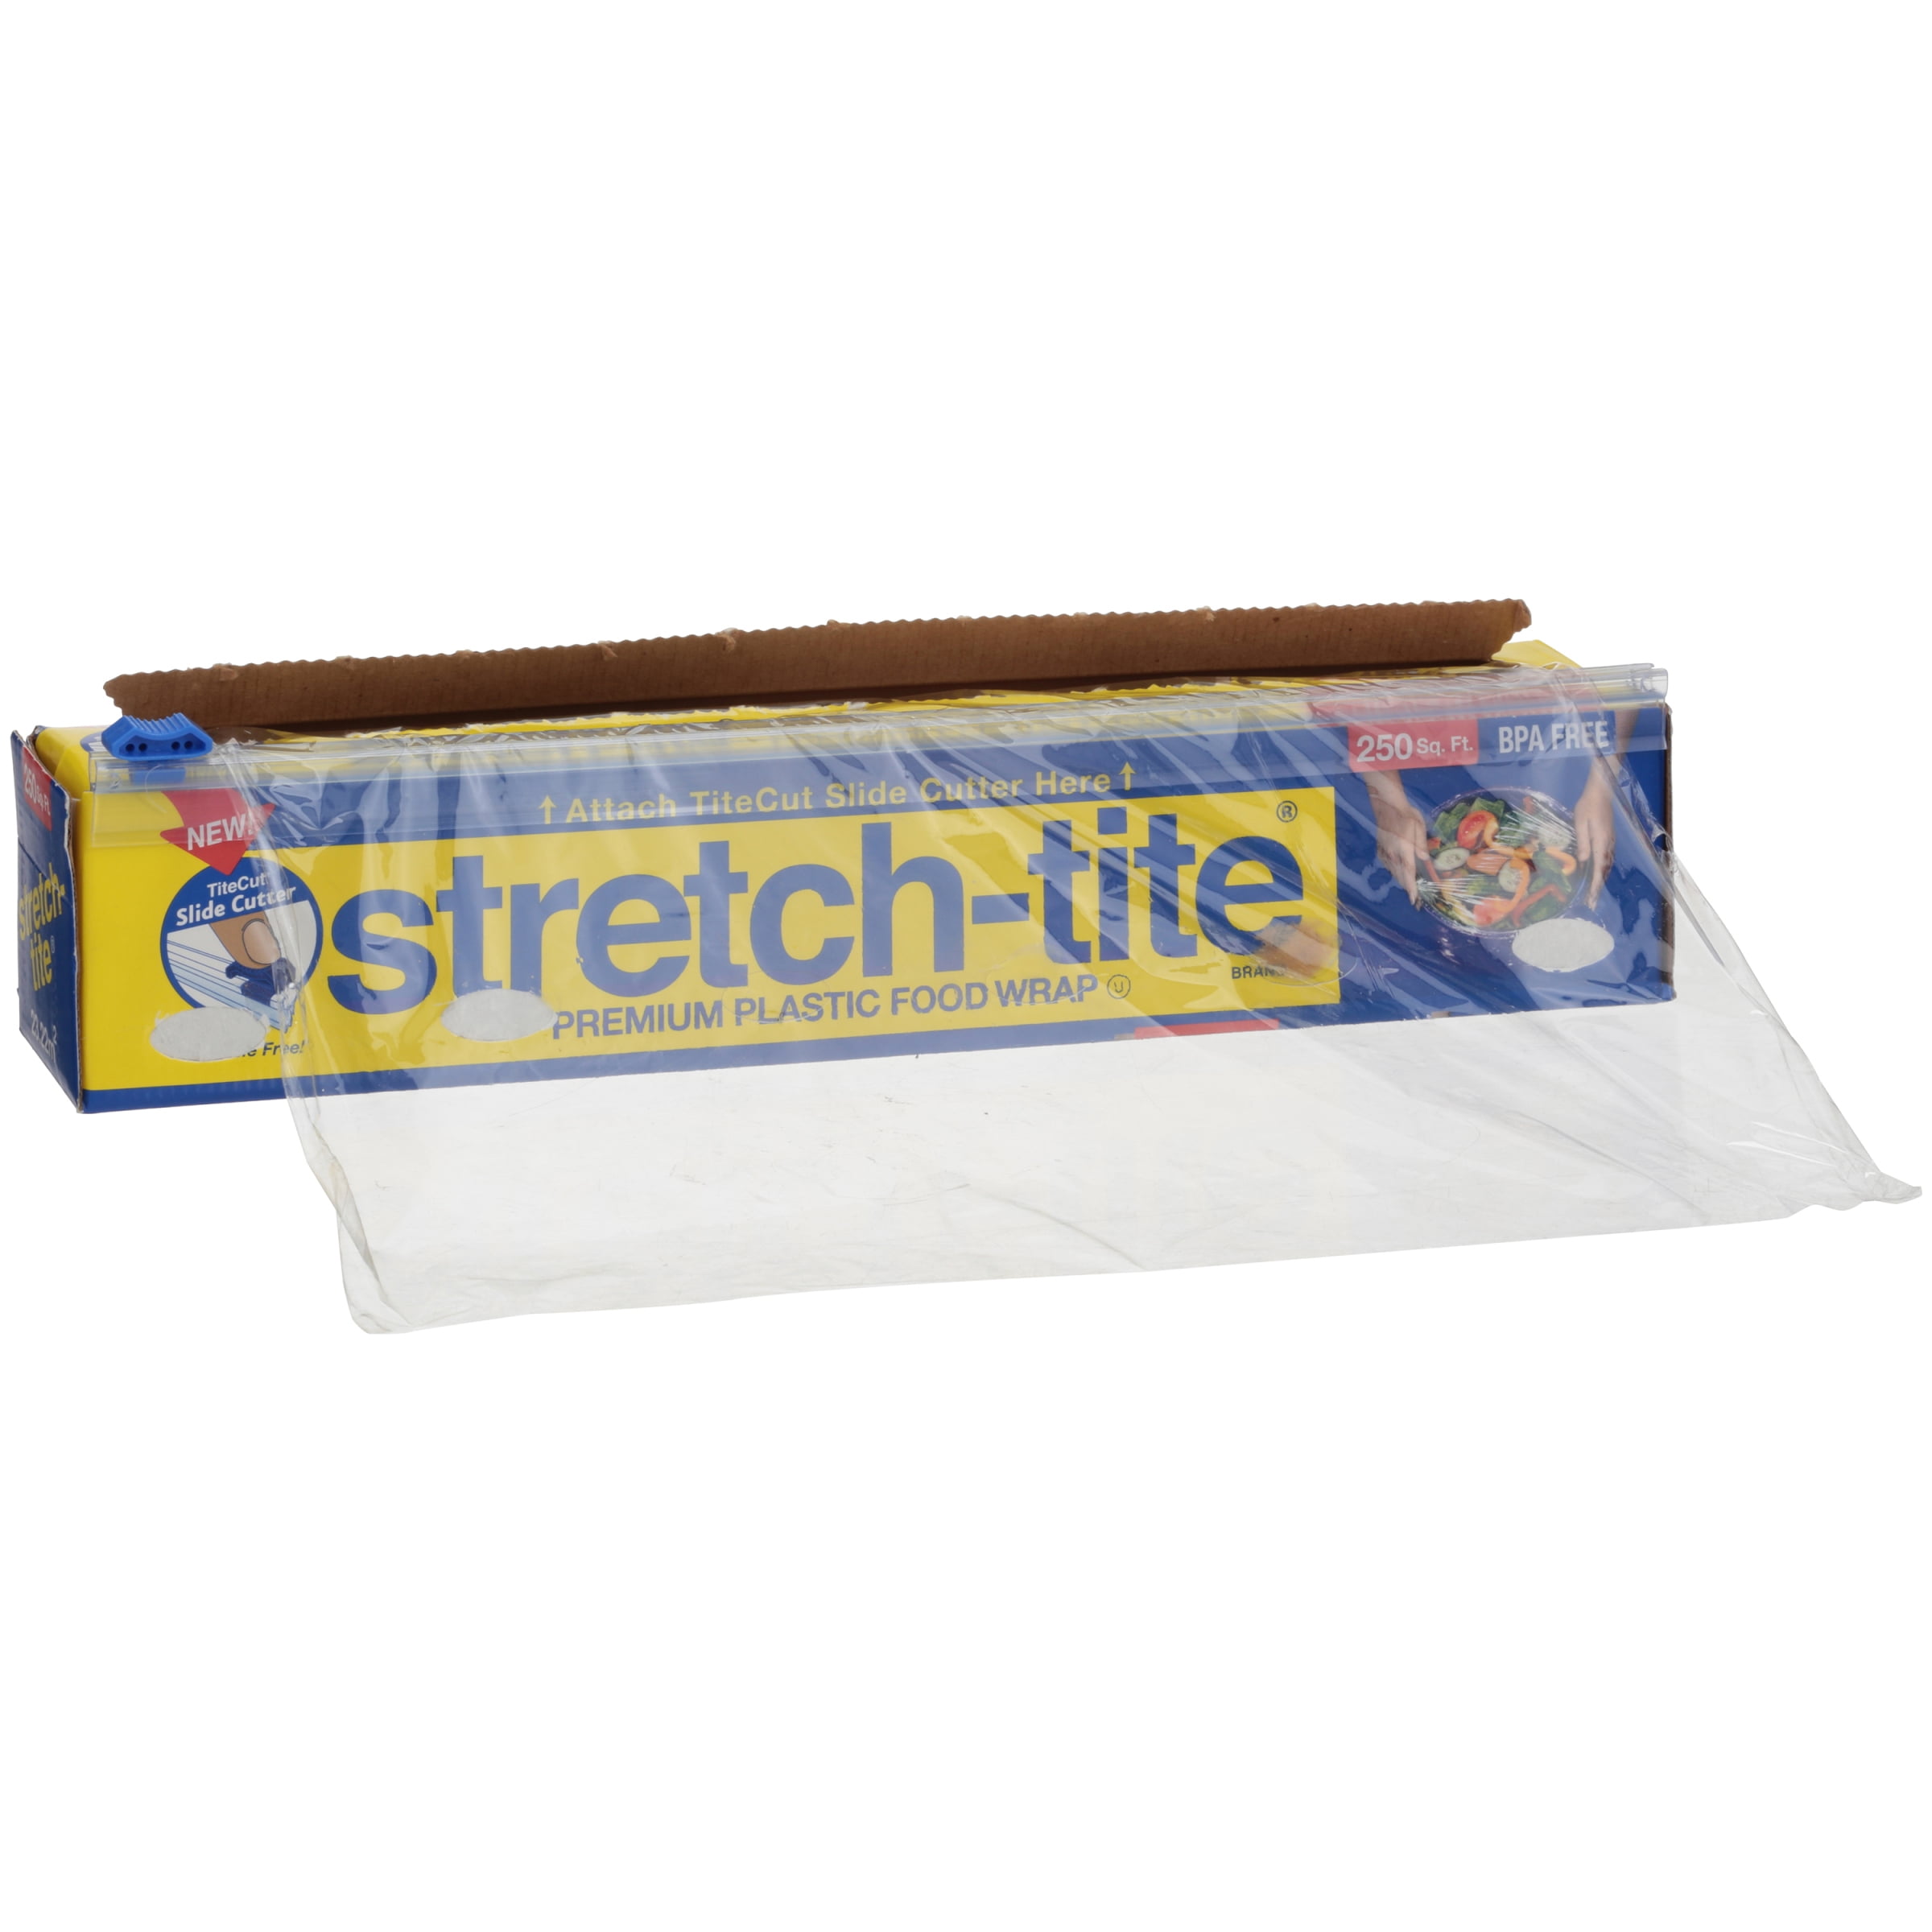 Freeze-Tite Clear High-Cling Freezer Wrap 15 x 250 FT - 12 Pack (10561)